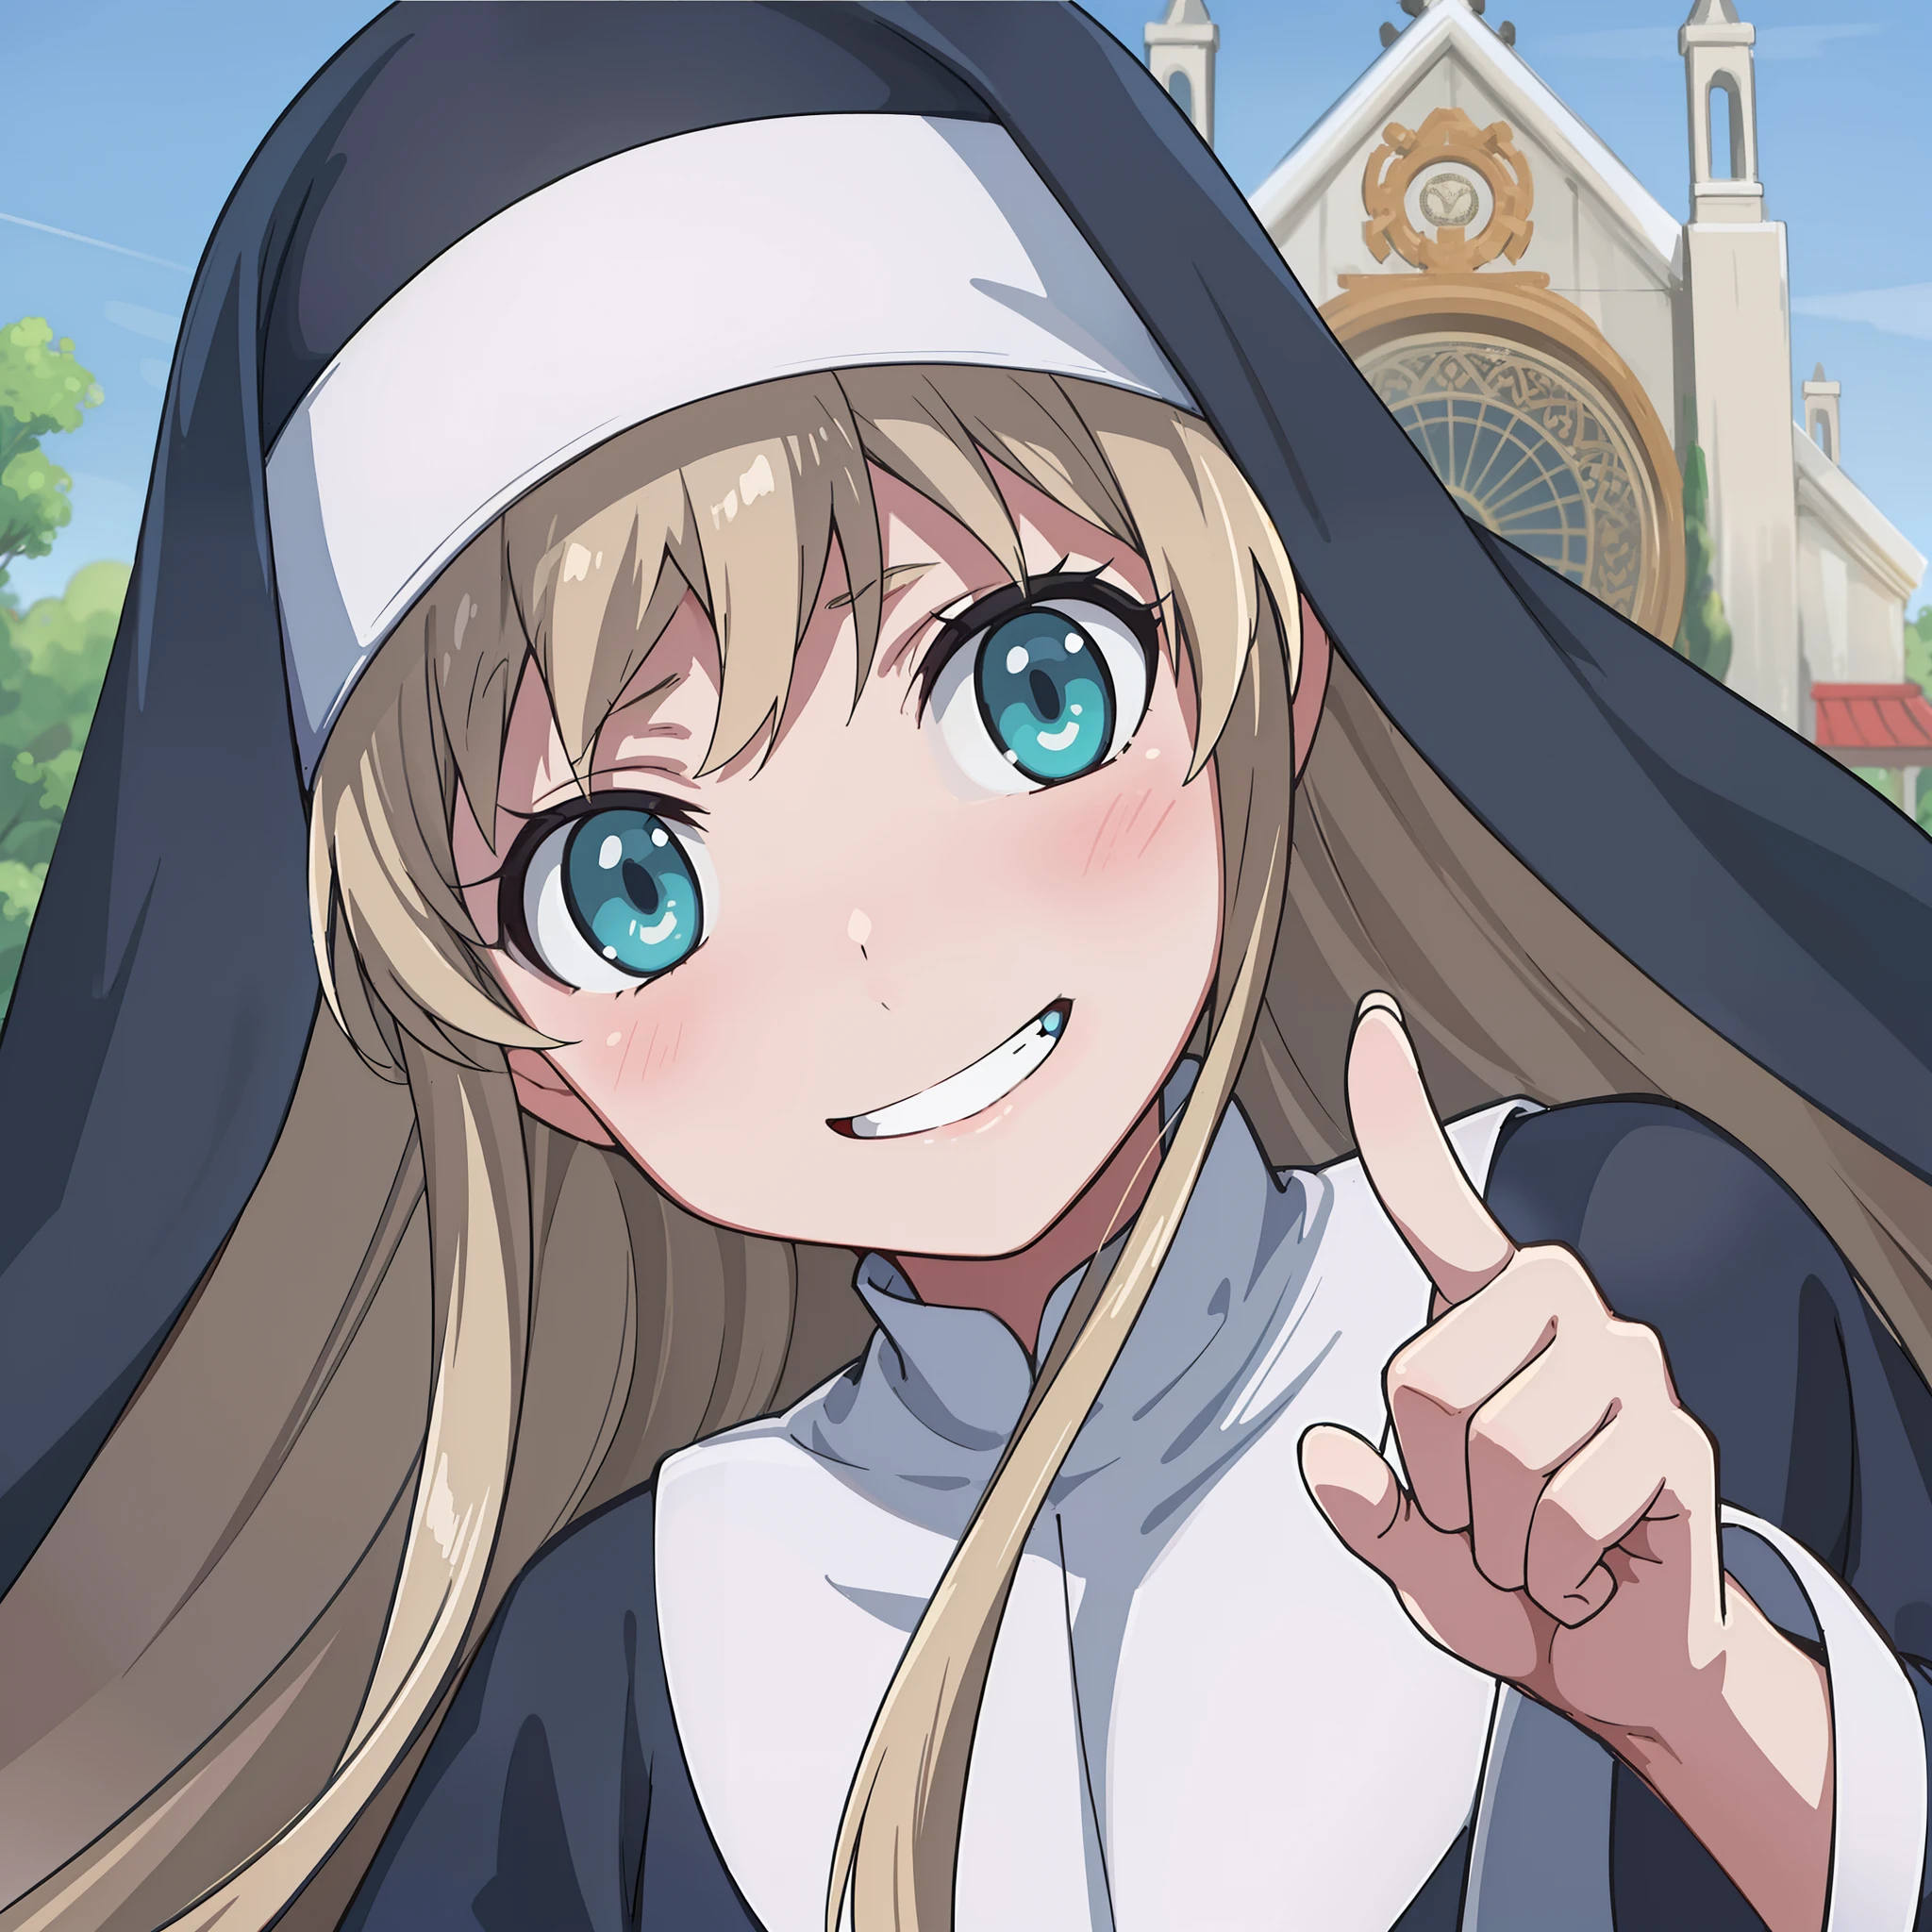 hiquality, tmasterpiece (one girls) nun. Cassock clothing. blonde woman. Cyan eyes. ssmile. Against the background of the sky, temple. the trees. Hand with fingers. happy face.